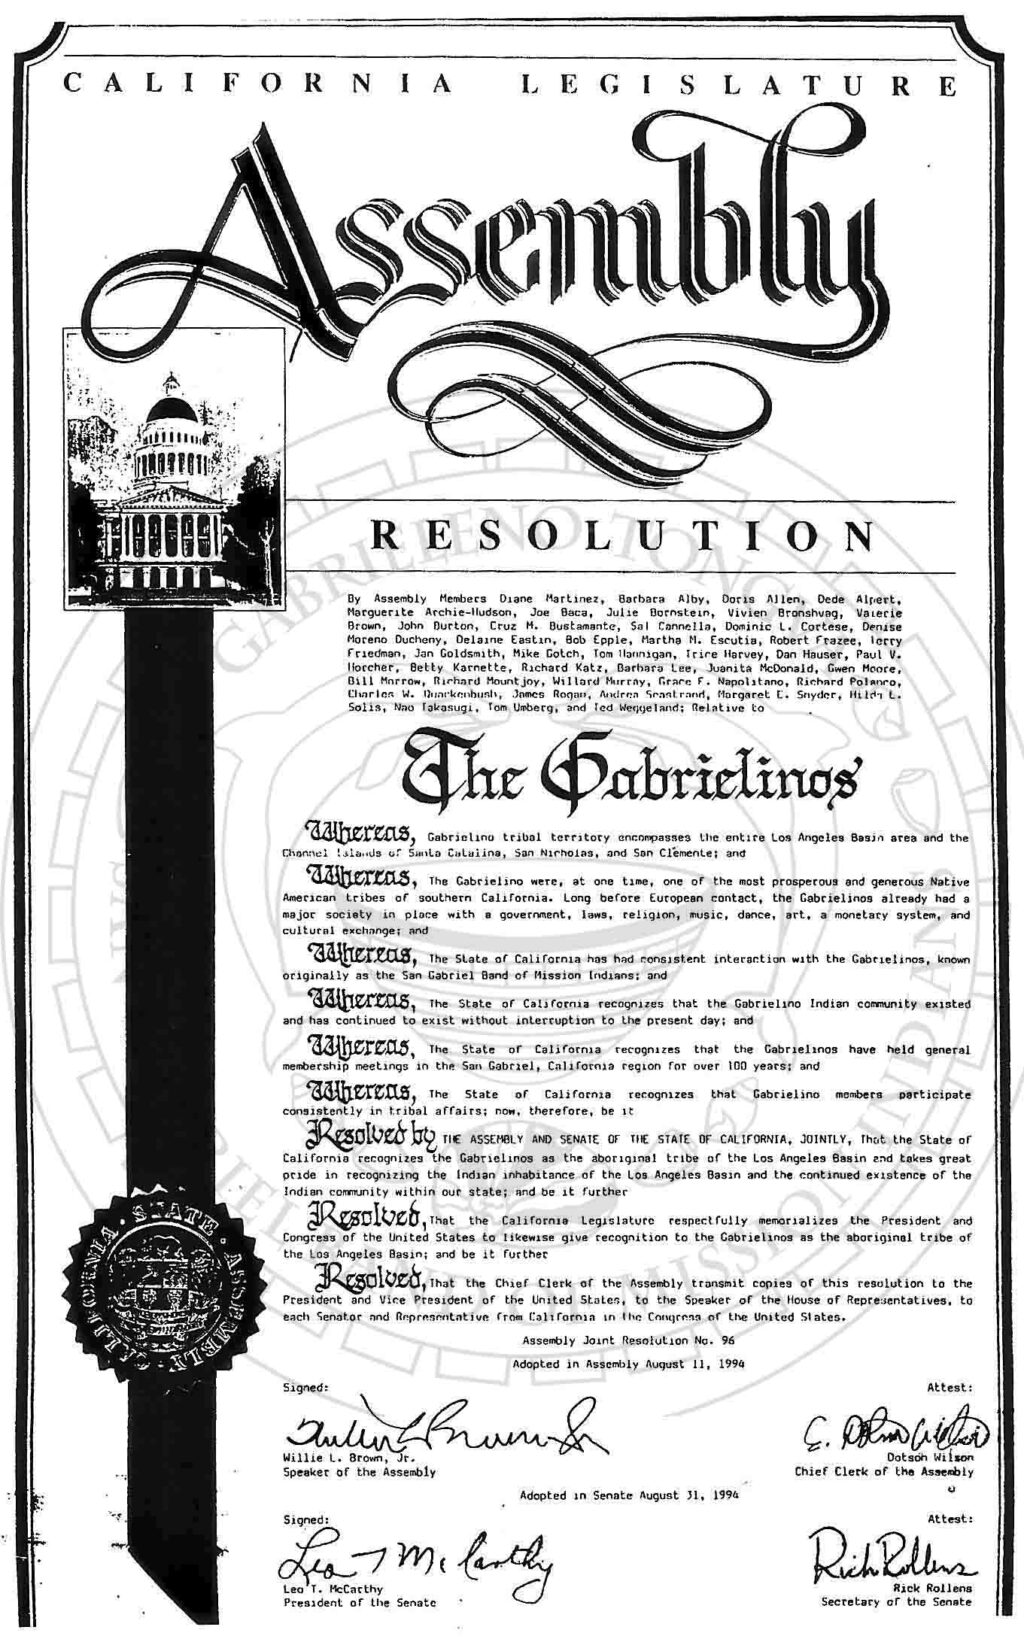 Facsimile of California State Assembly Resolution